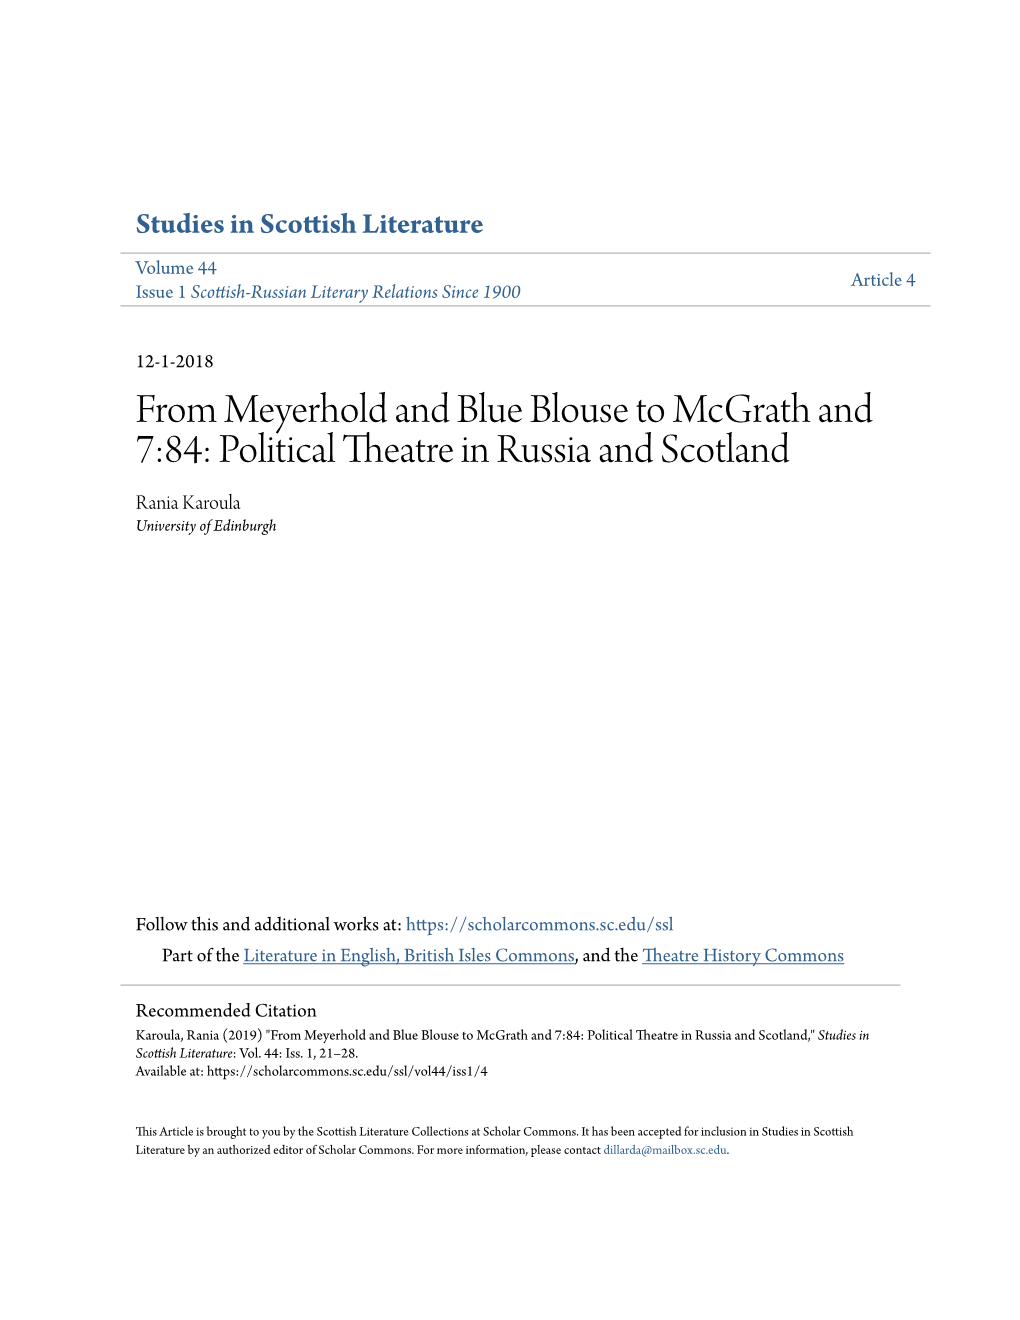 From Meyerhold and Blue Blouse to Mcgrath and 7:84: Political Theatre in Russia and Scotland Rania Karoula University of Edinburgh